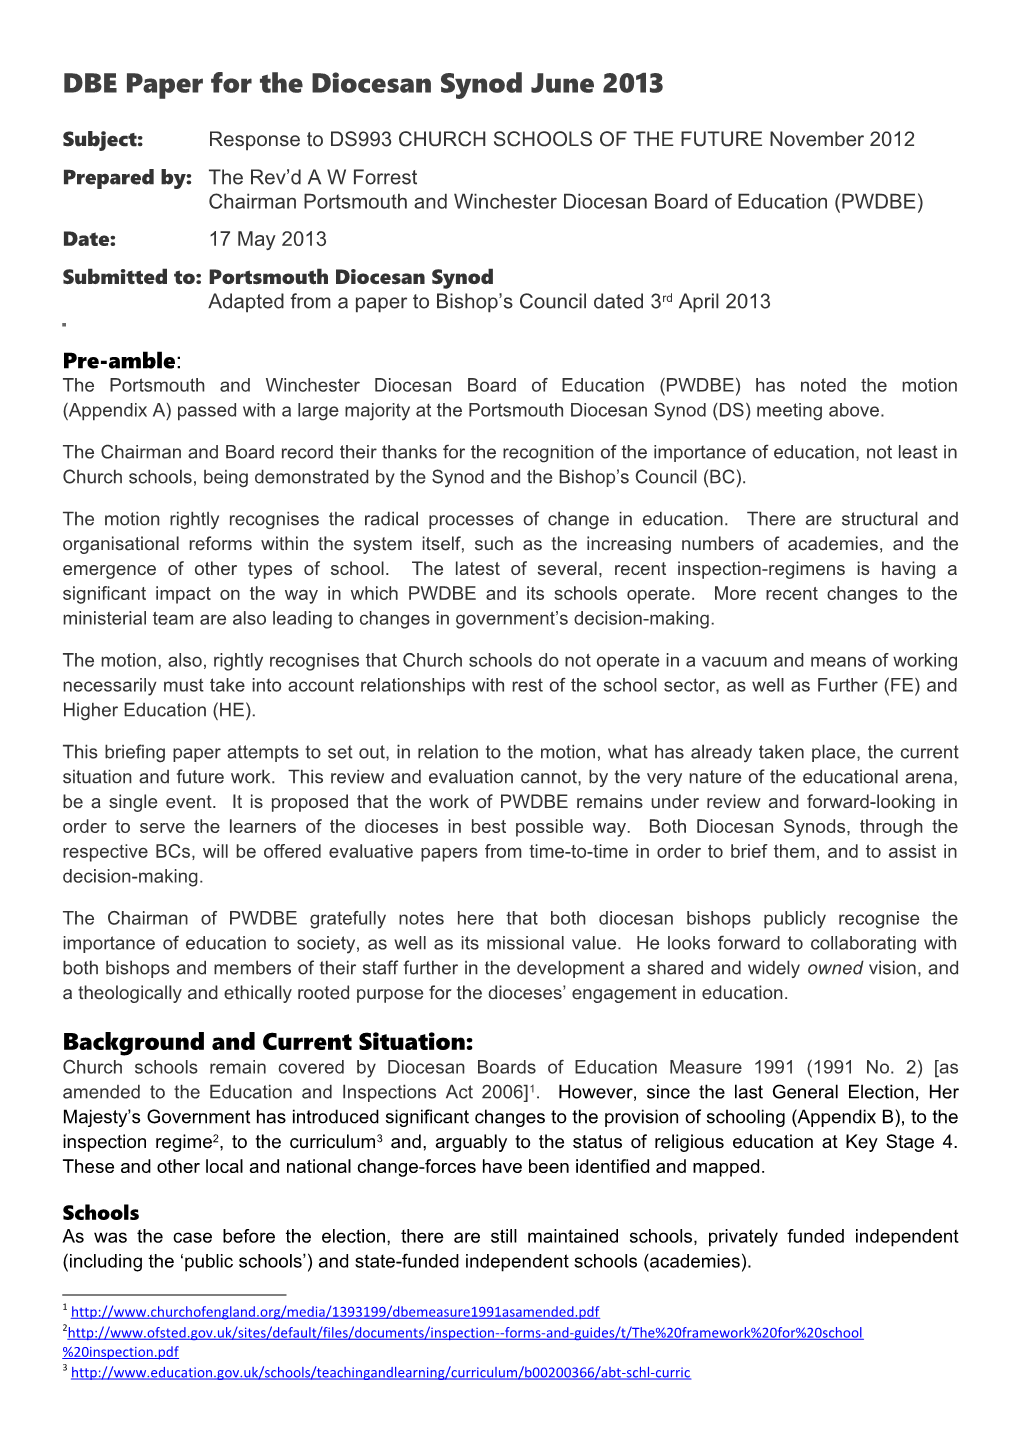 DBE Paper for the Diocesan Synod June 2013